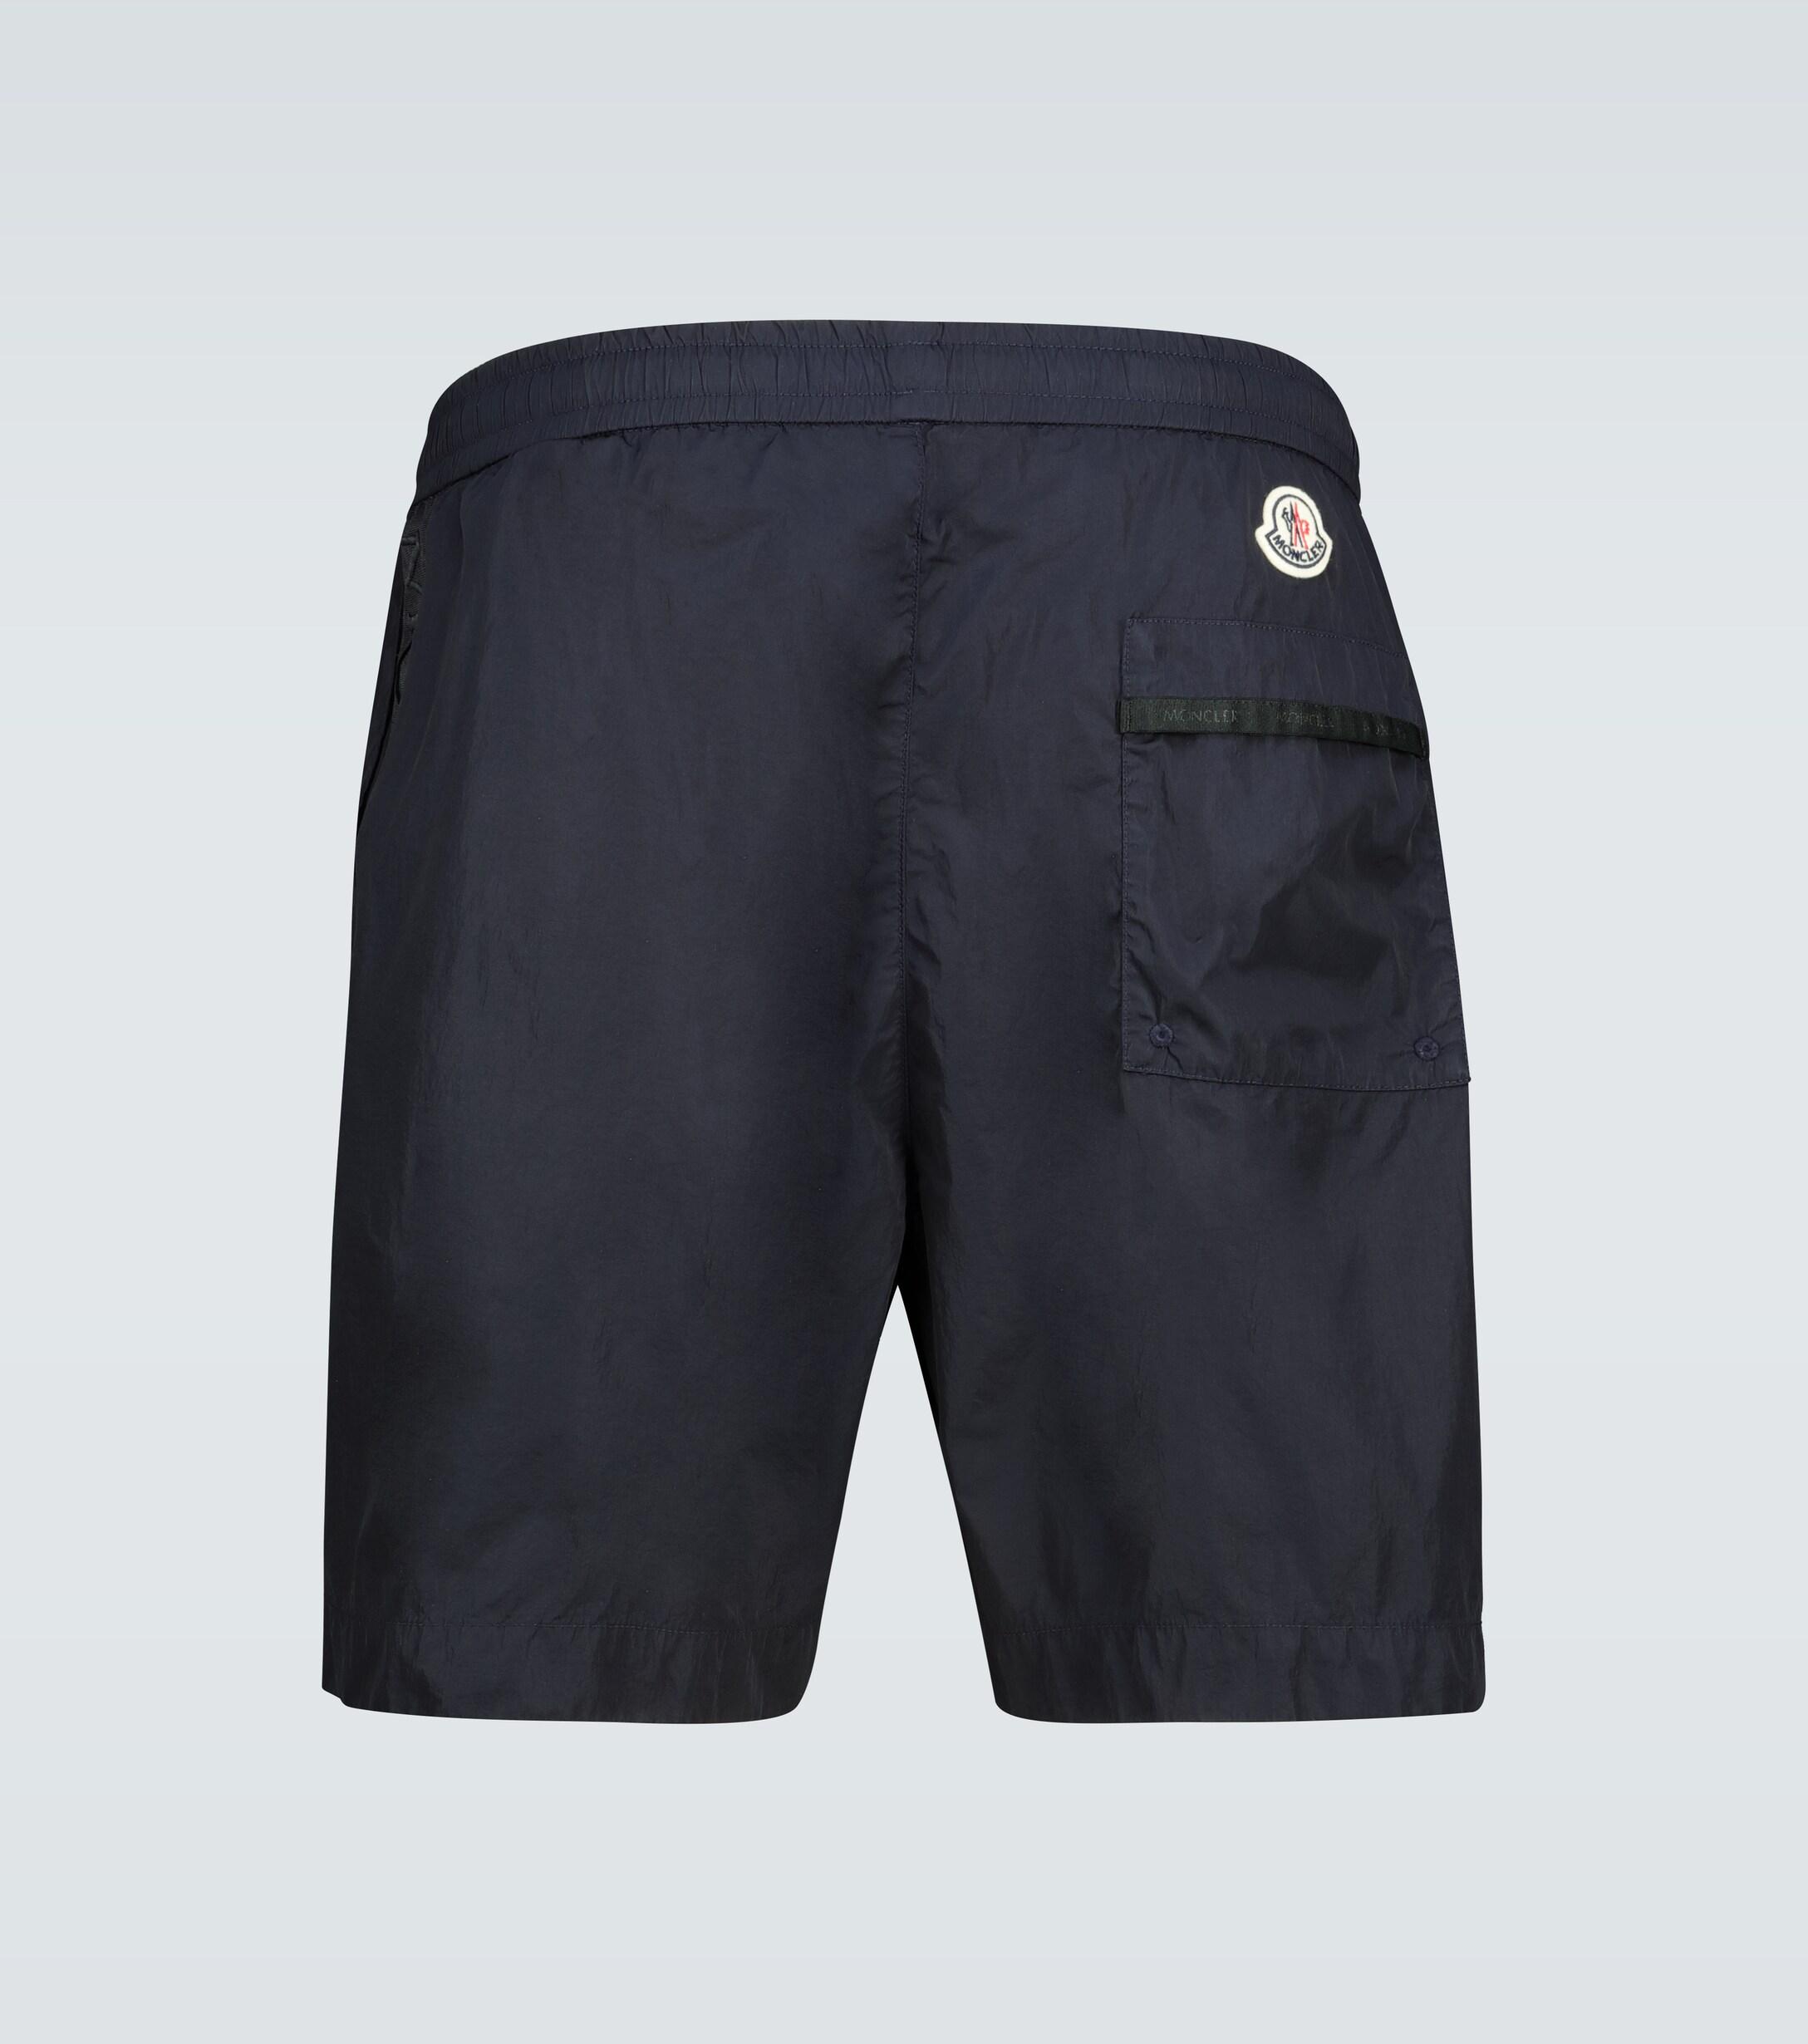 Moncler Bermuda Technical Fabric Shorts in Blue for Men - Lyst